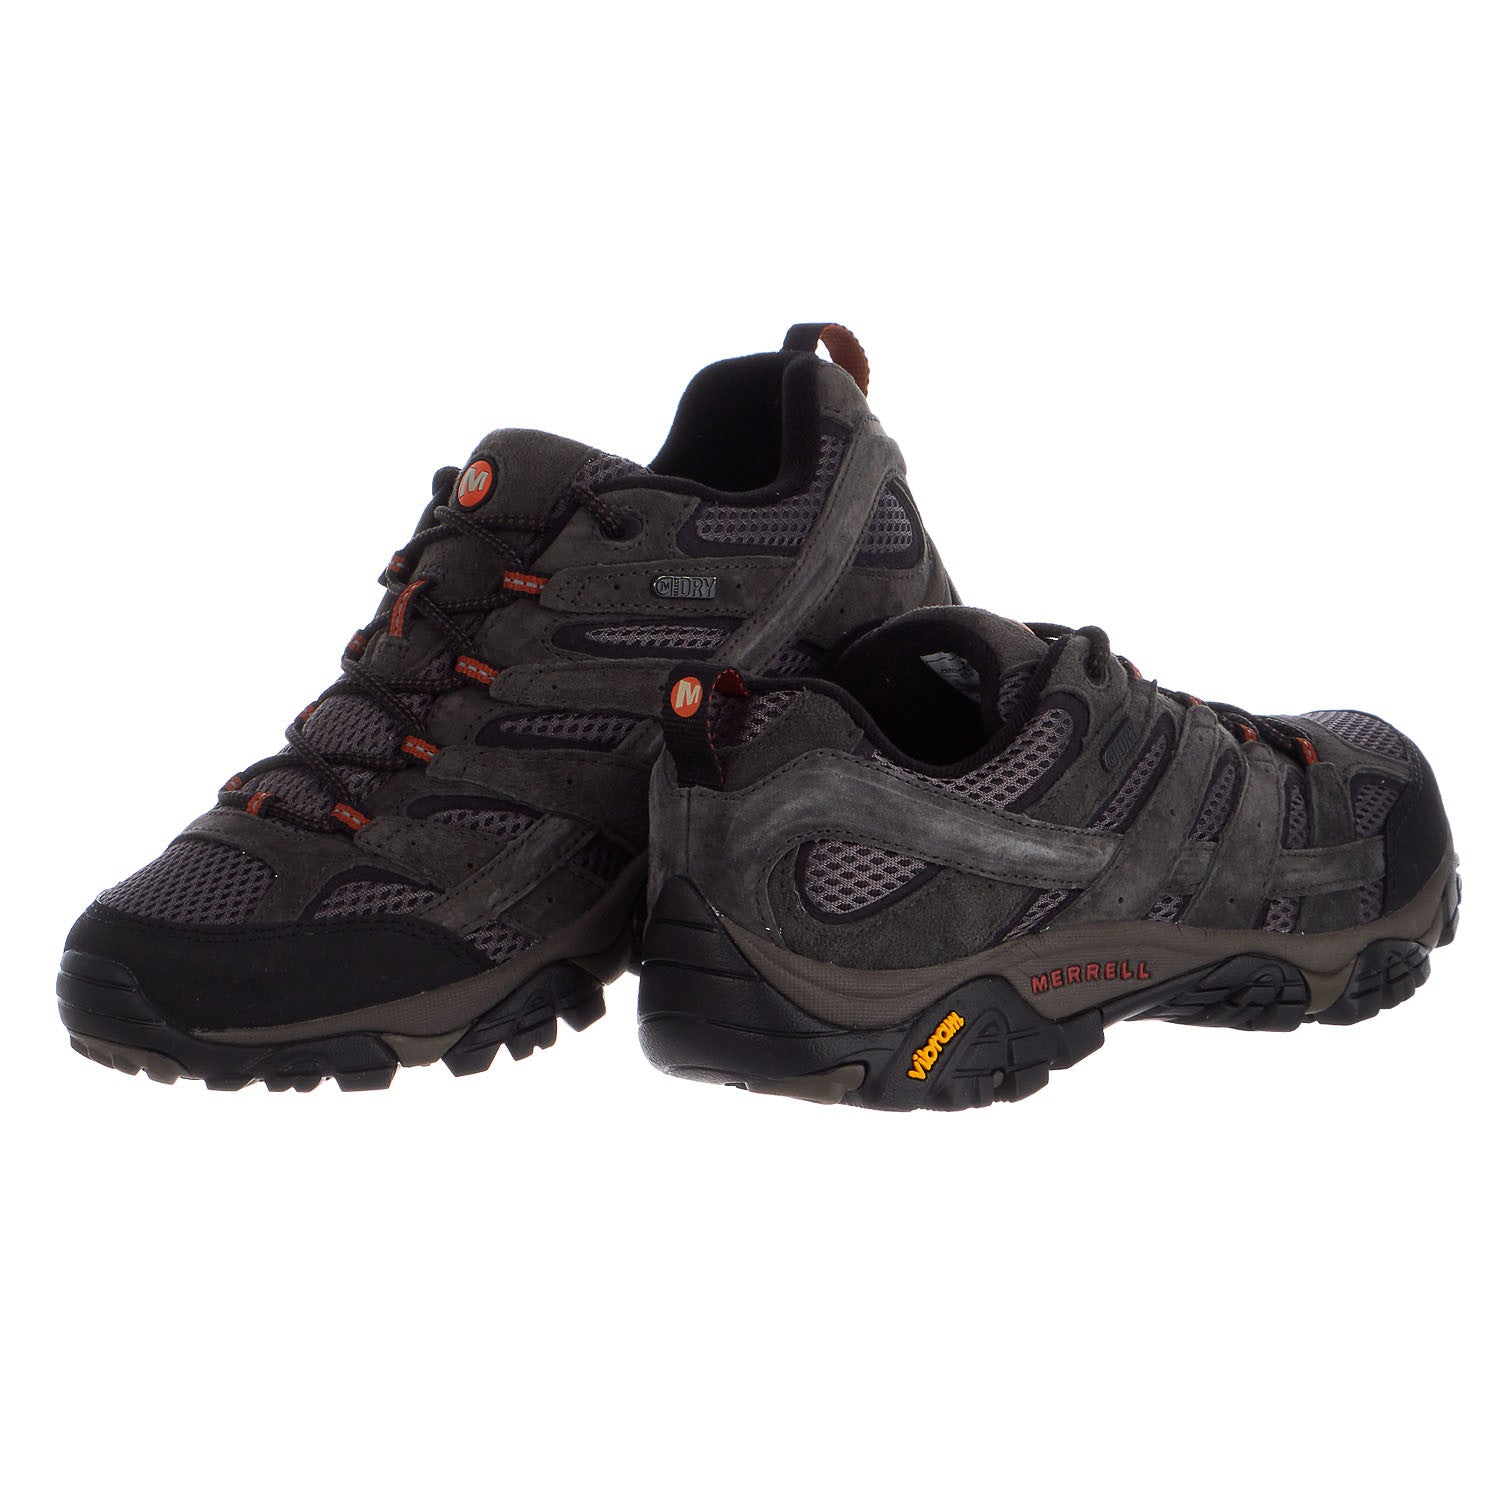 Merrell Moab Waterproof Review Tested By GearLab | atelier-yuwa.ciao.jp